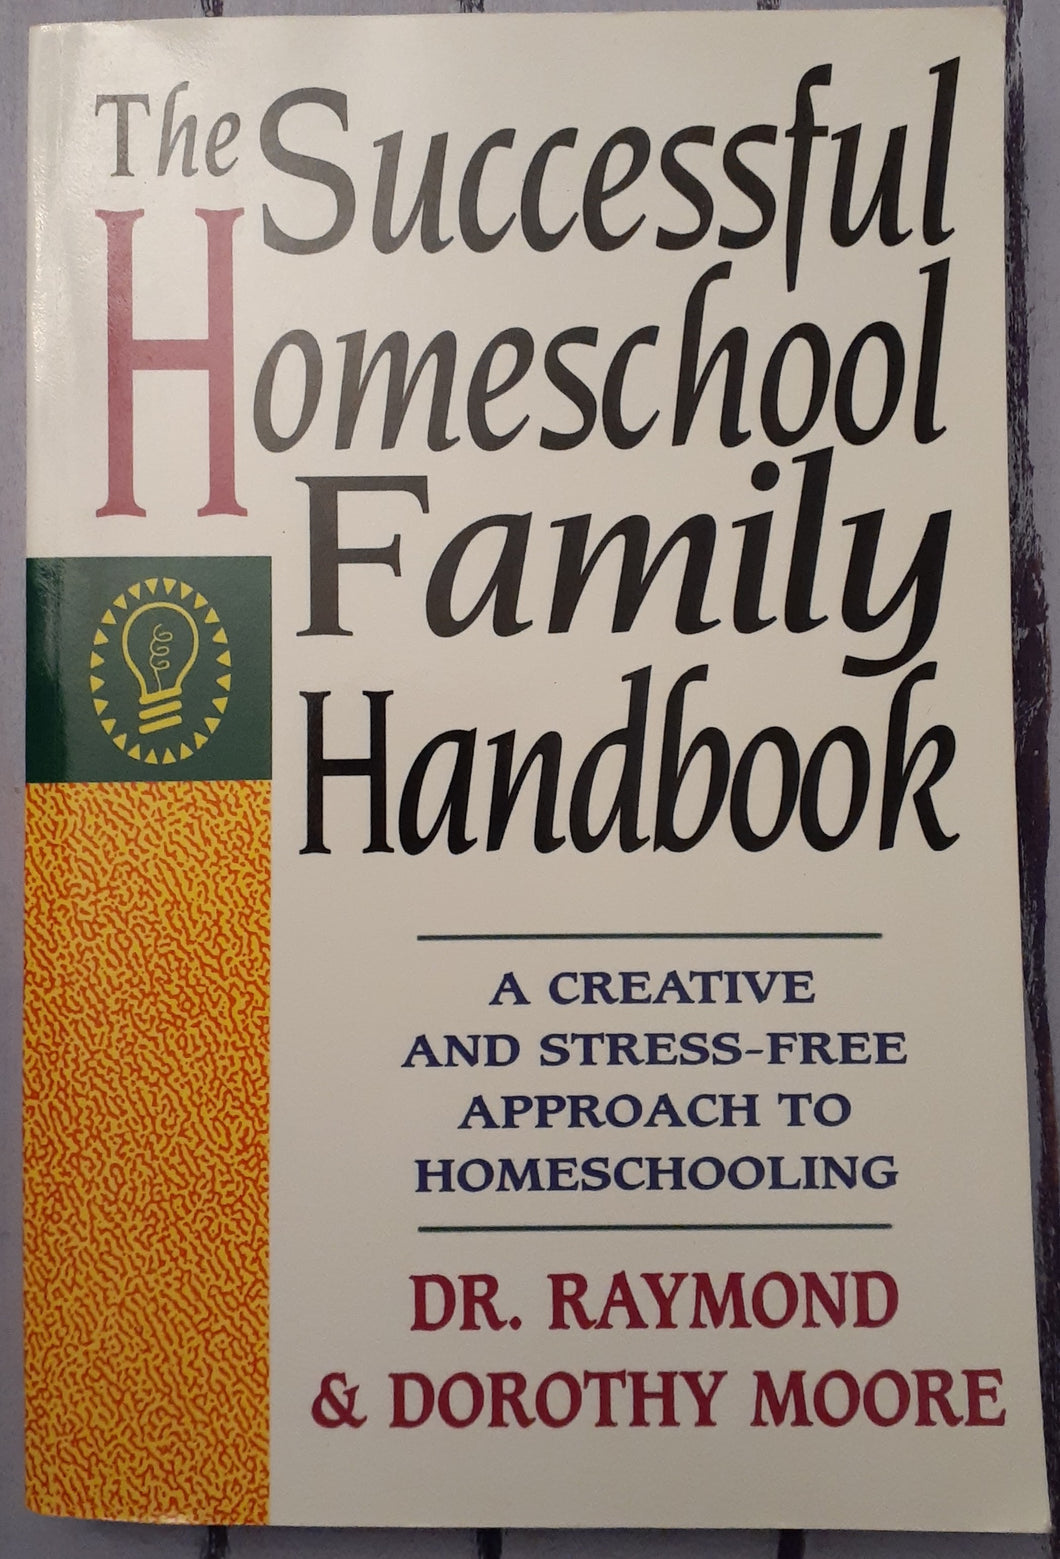 The Homeschool Family Handbook: A Creative and Stress-free Approach to Homeschooling